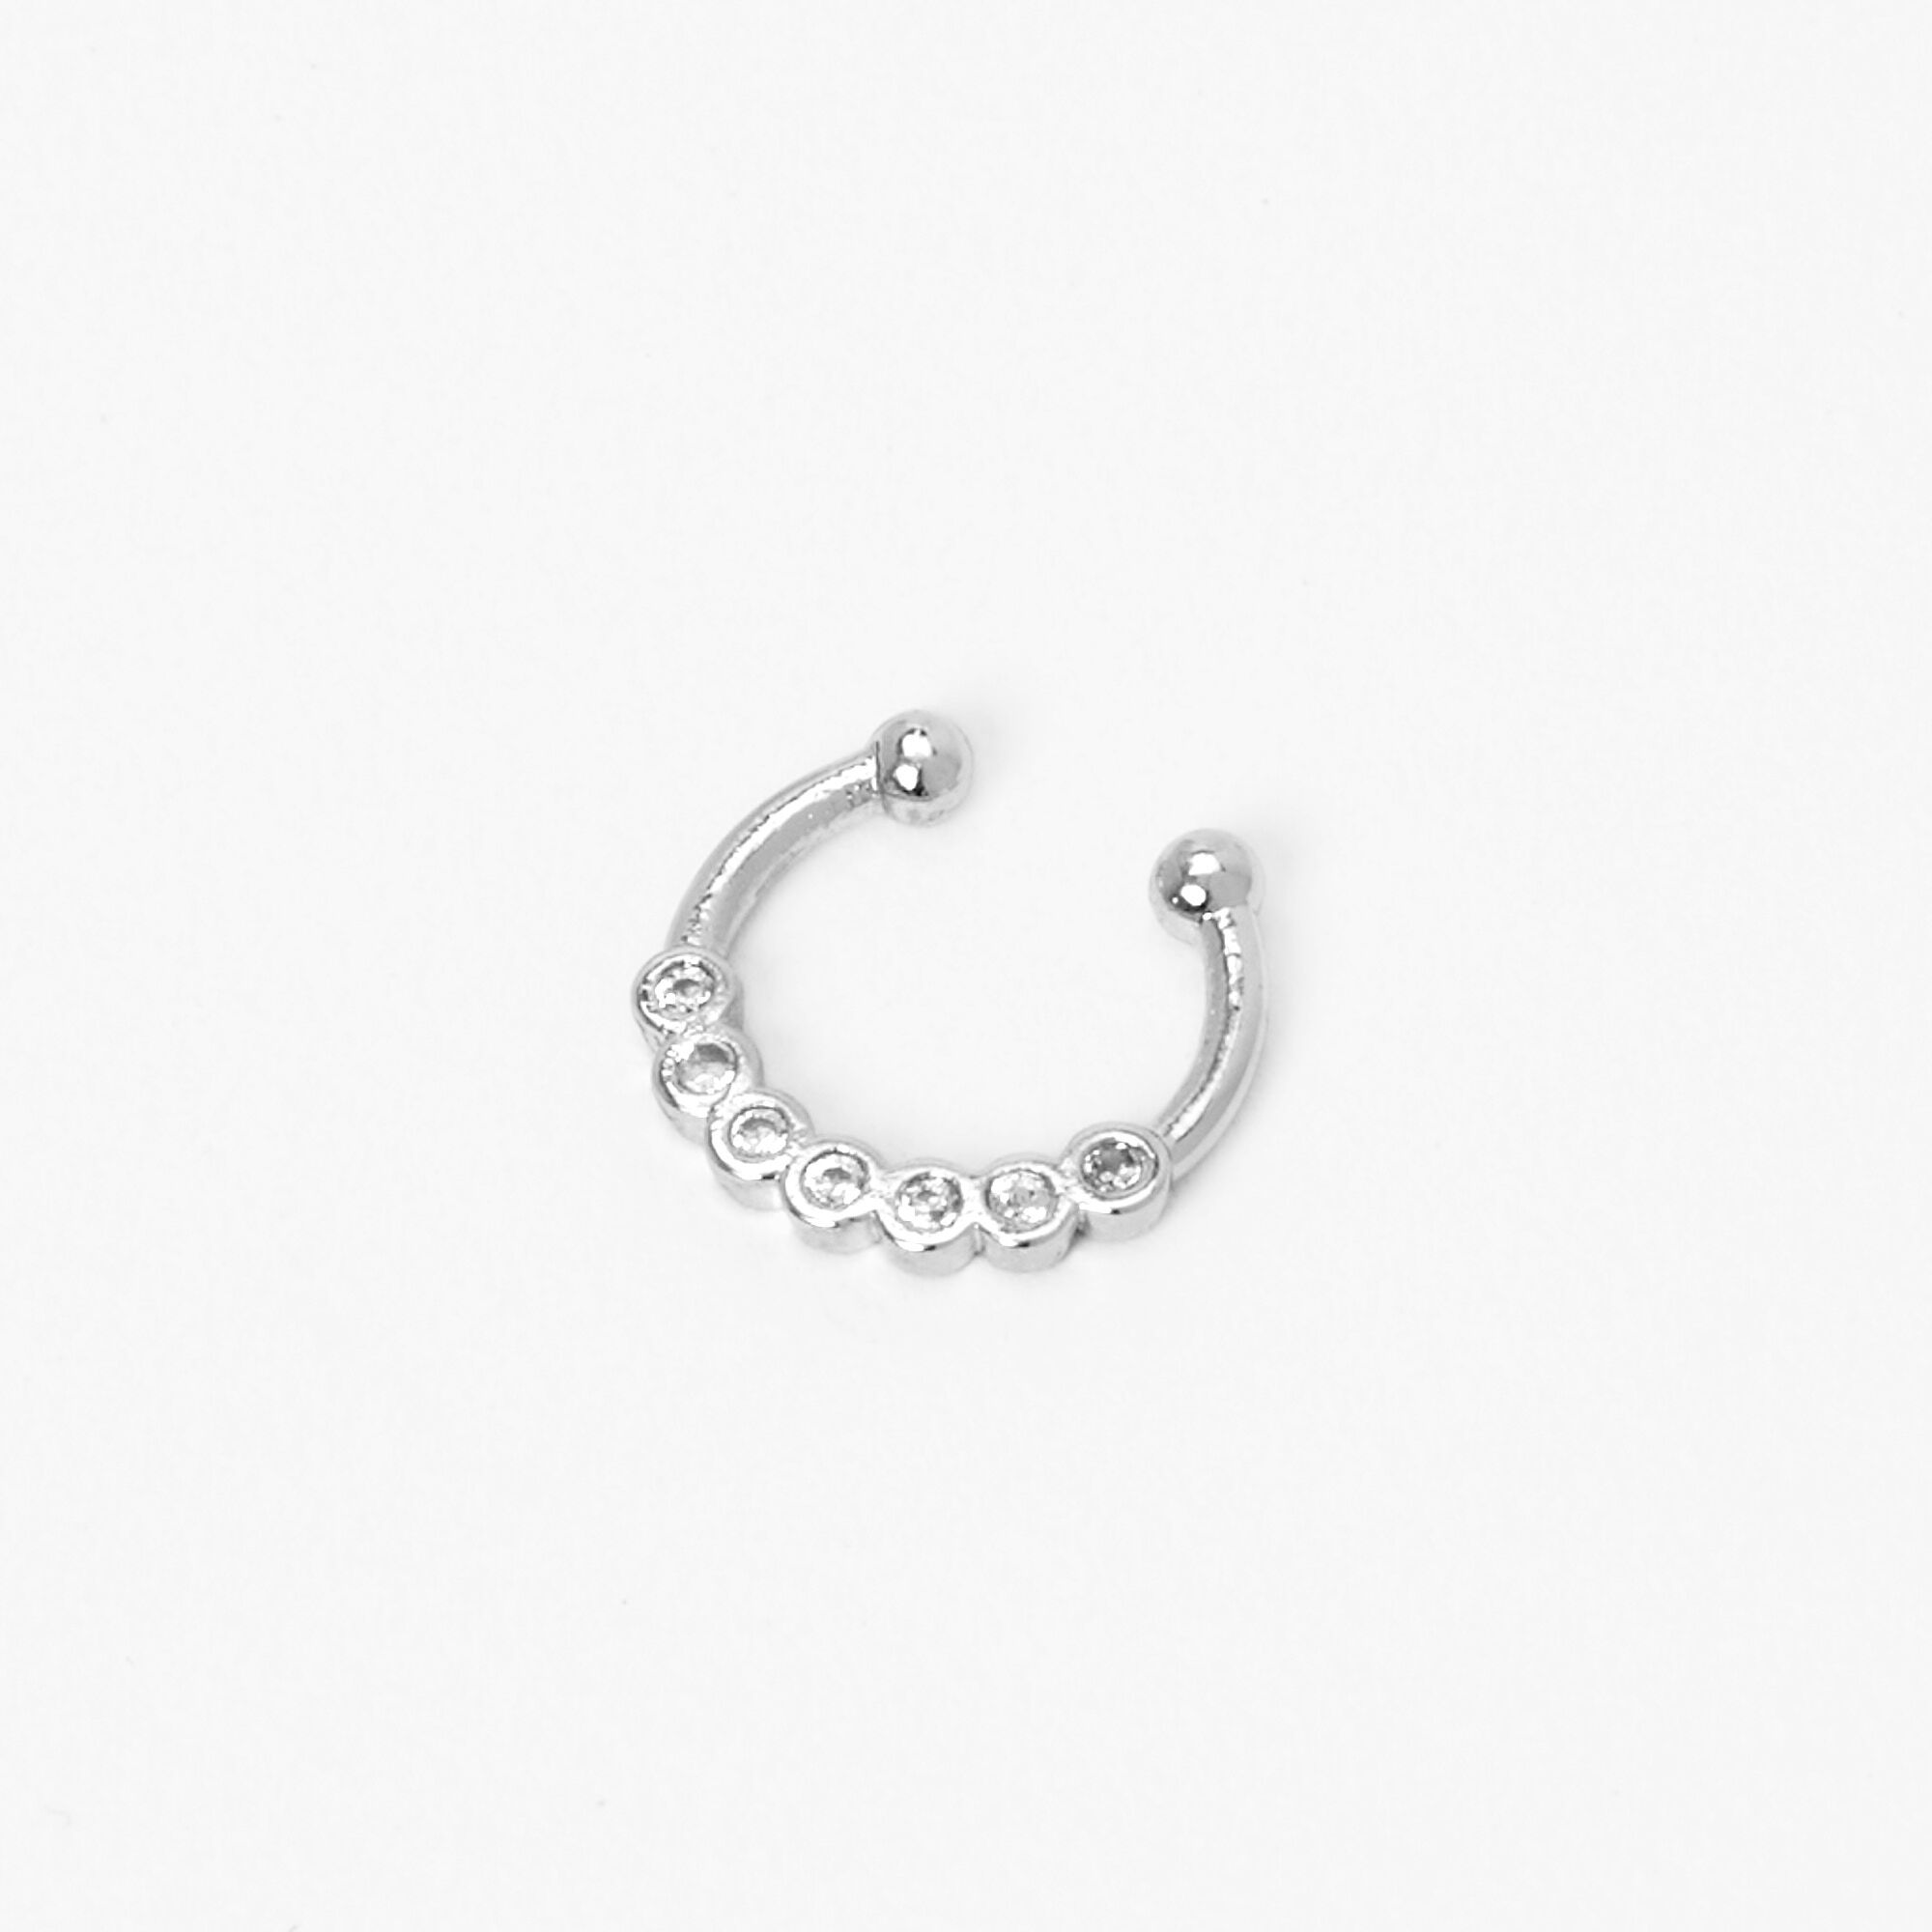 View Claires Tone Faux Crystal Septum Nose Ring Silver information